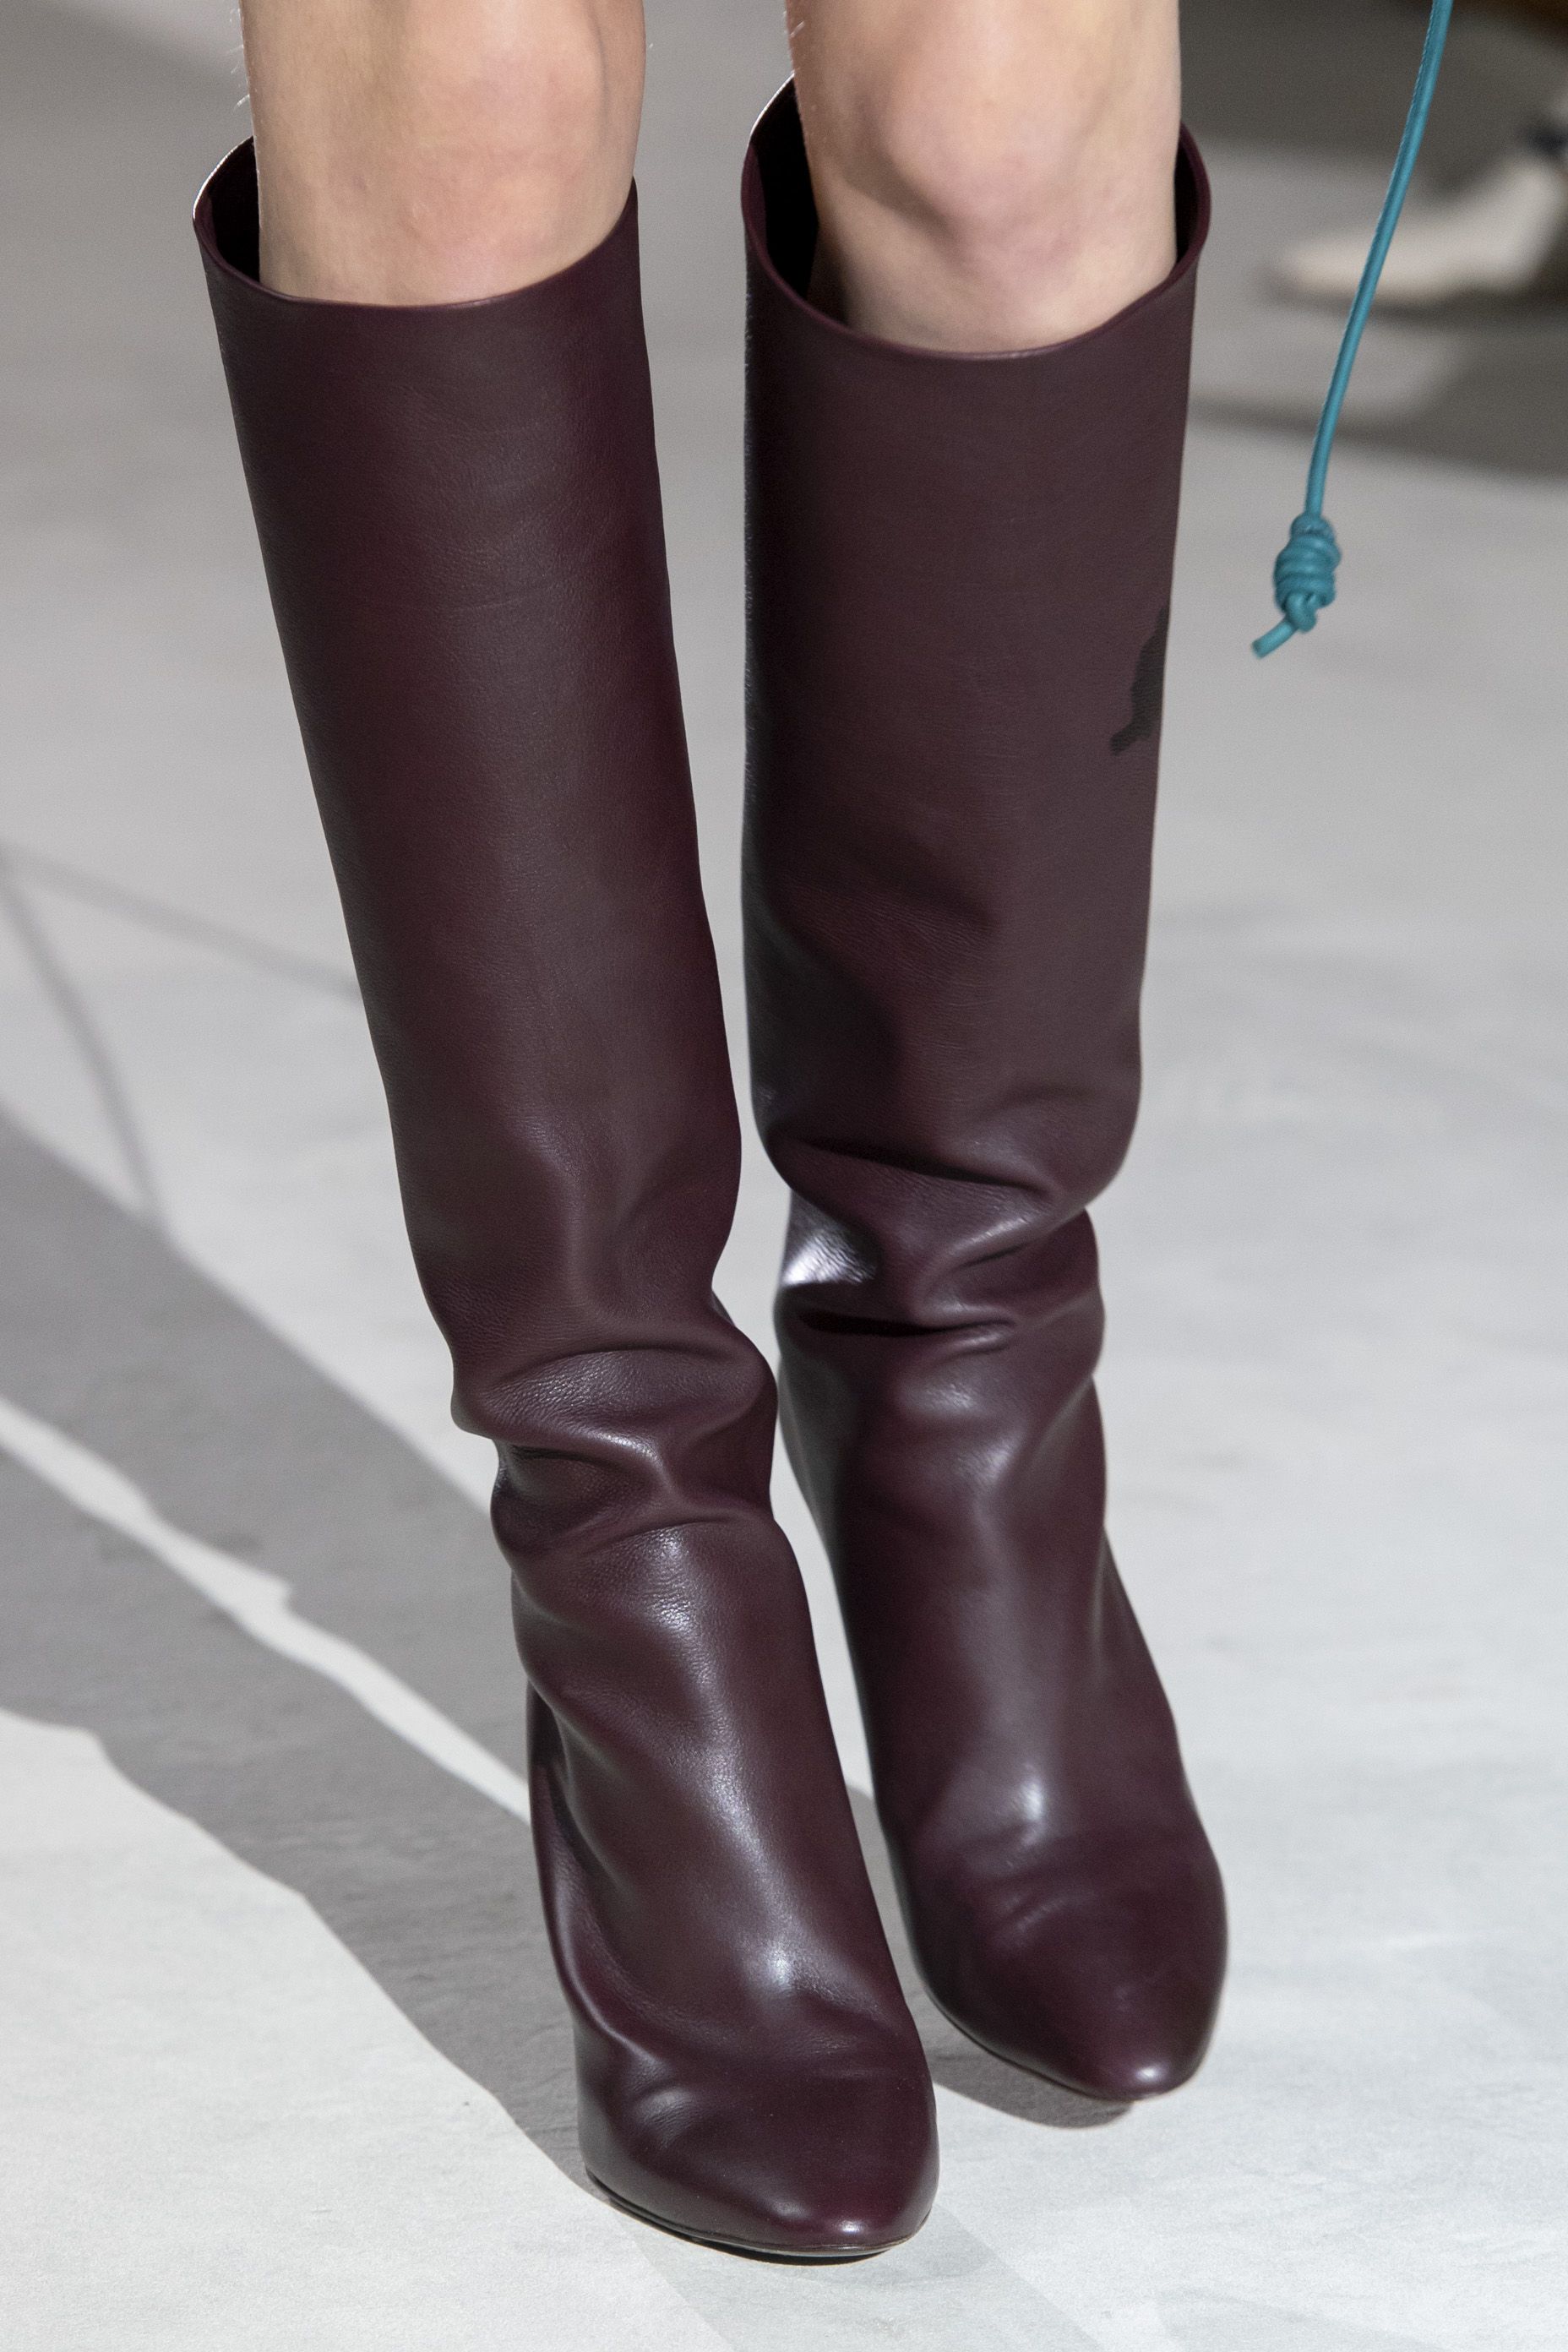 aw19 boot trends